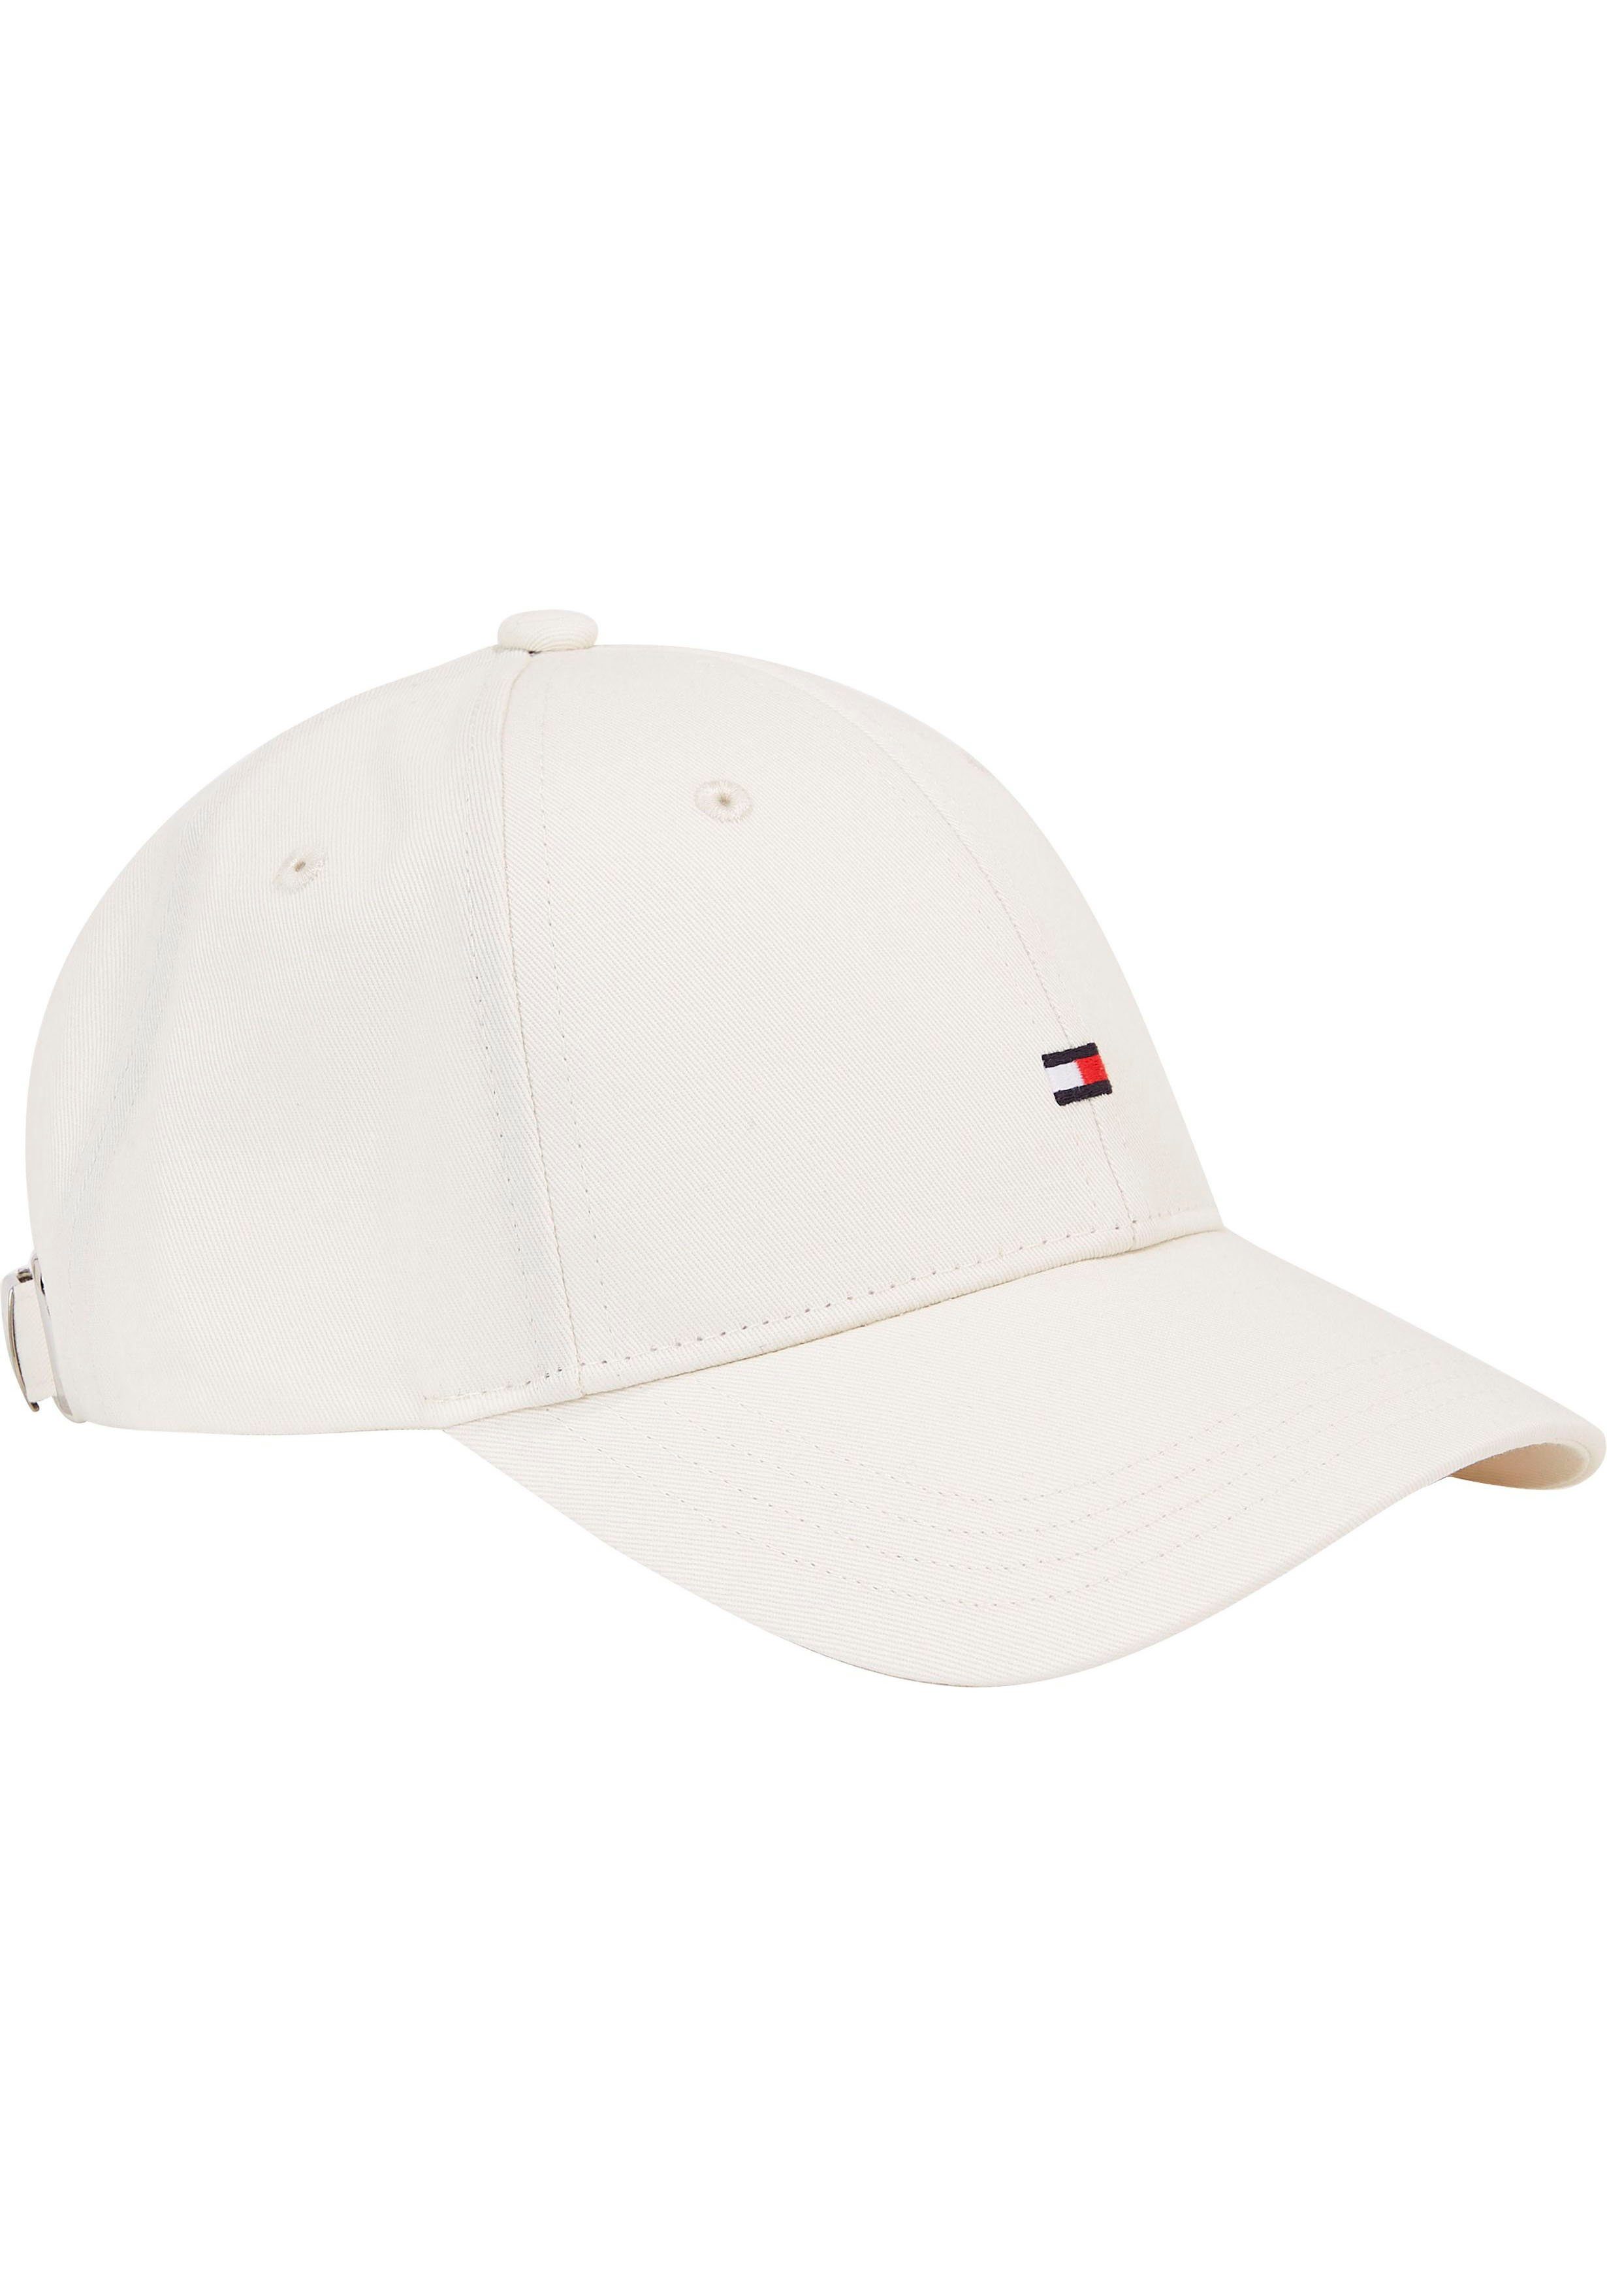 Cap Hilfiger SMALL Fitted FLAG Calico Tommy CAP mit Klemmverschluss